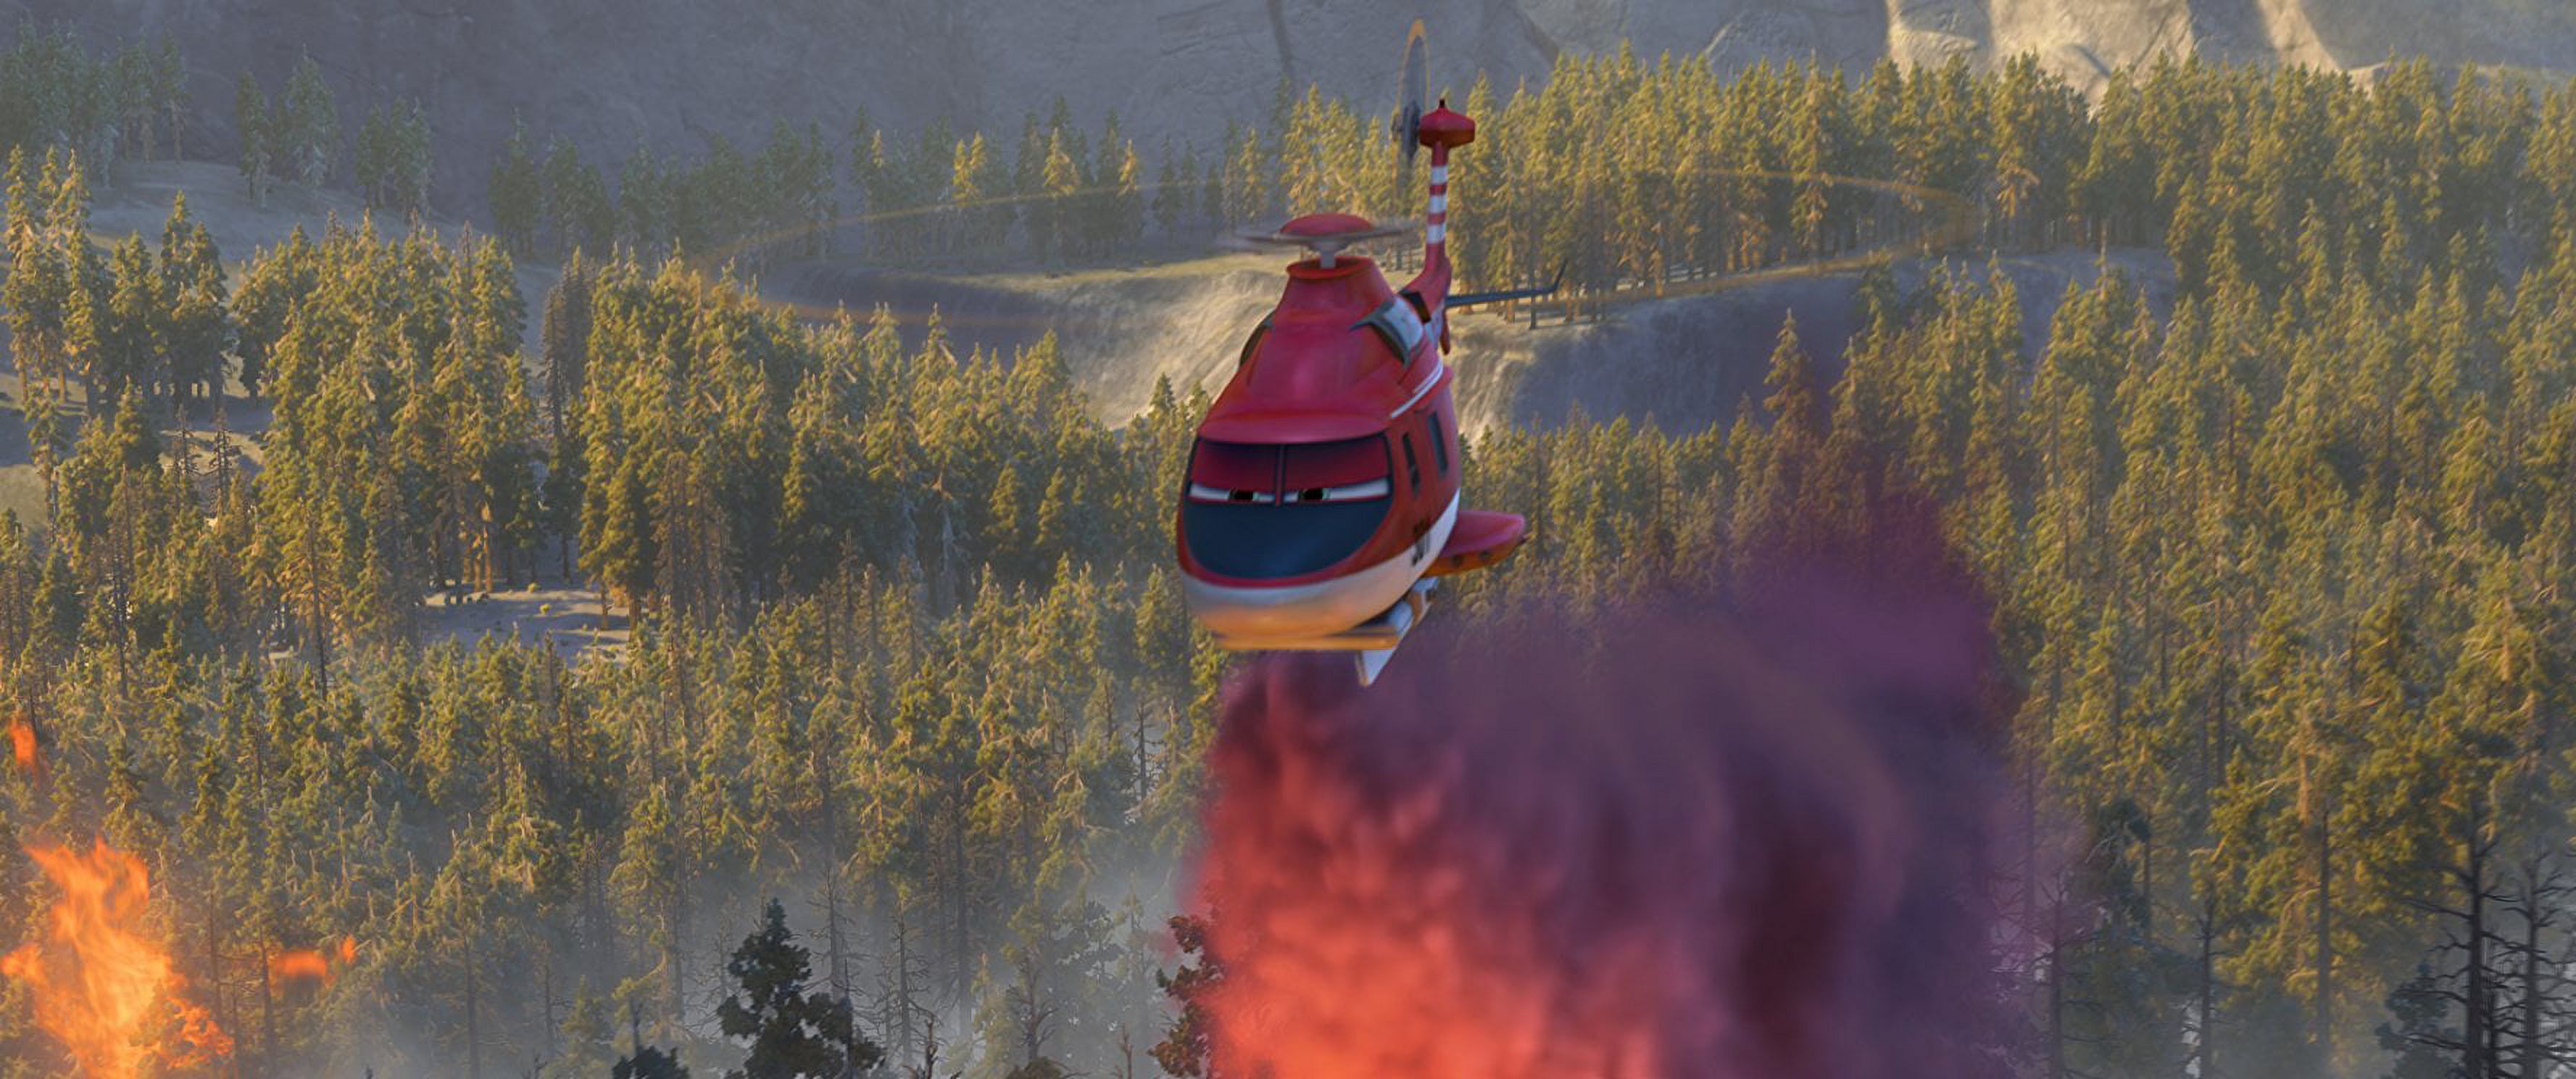 Planes Fire & Rescue (Blu-ray + DVD + Digital Code) - image 5 of 5